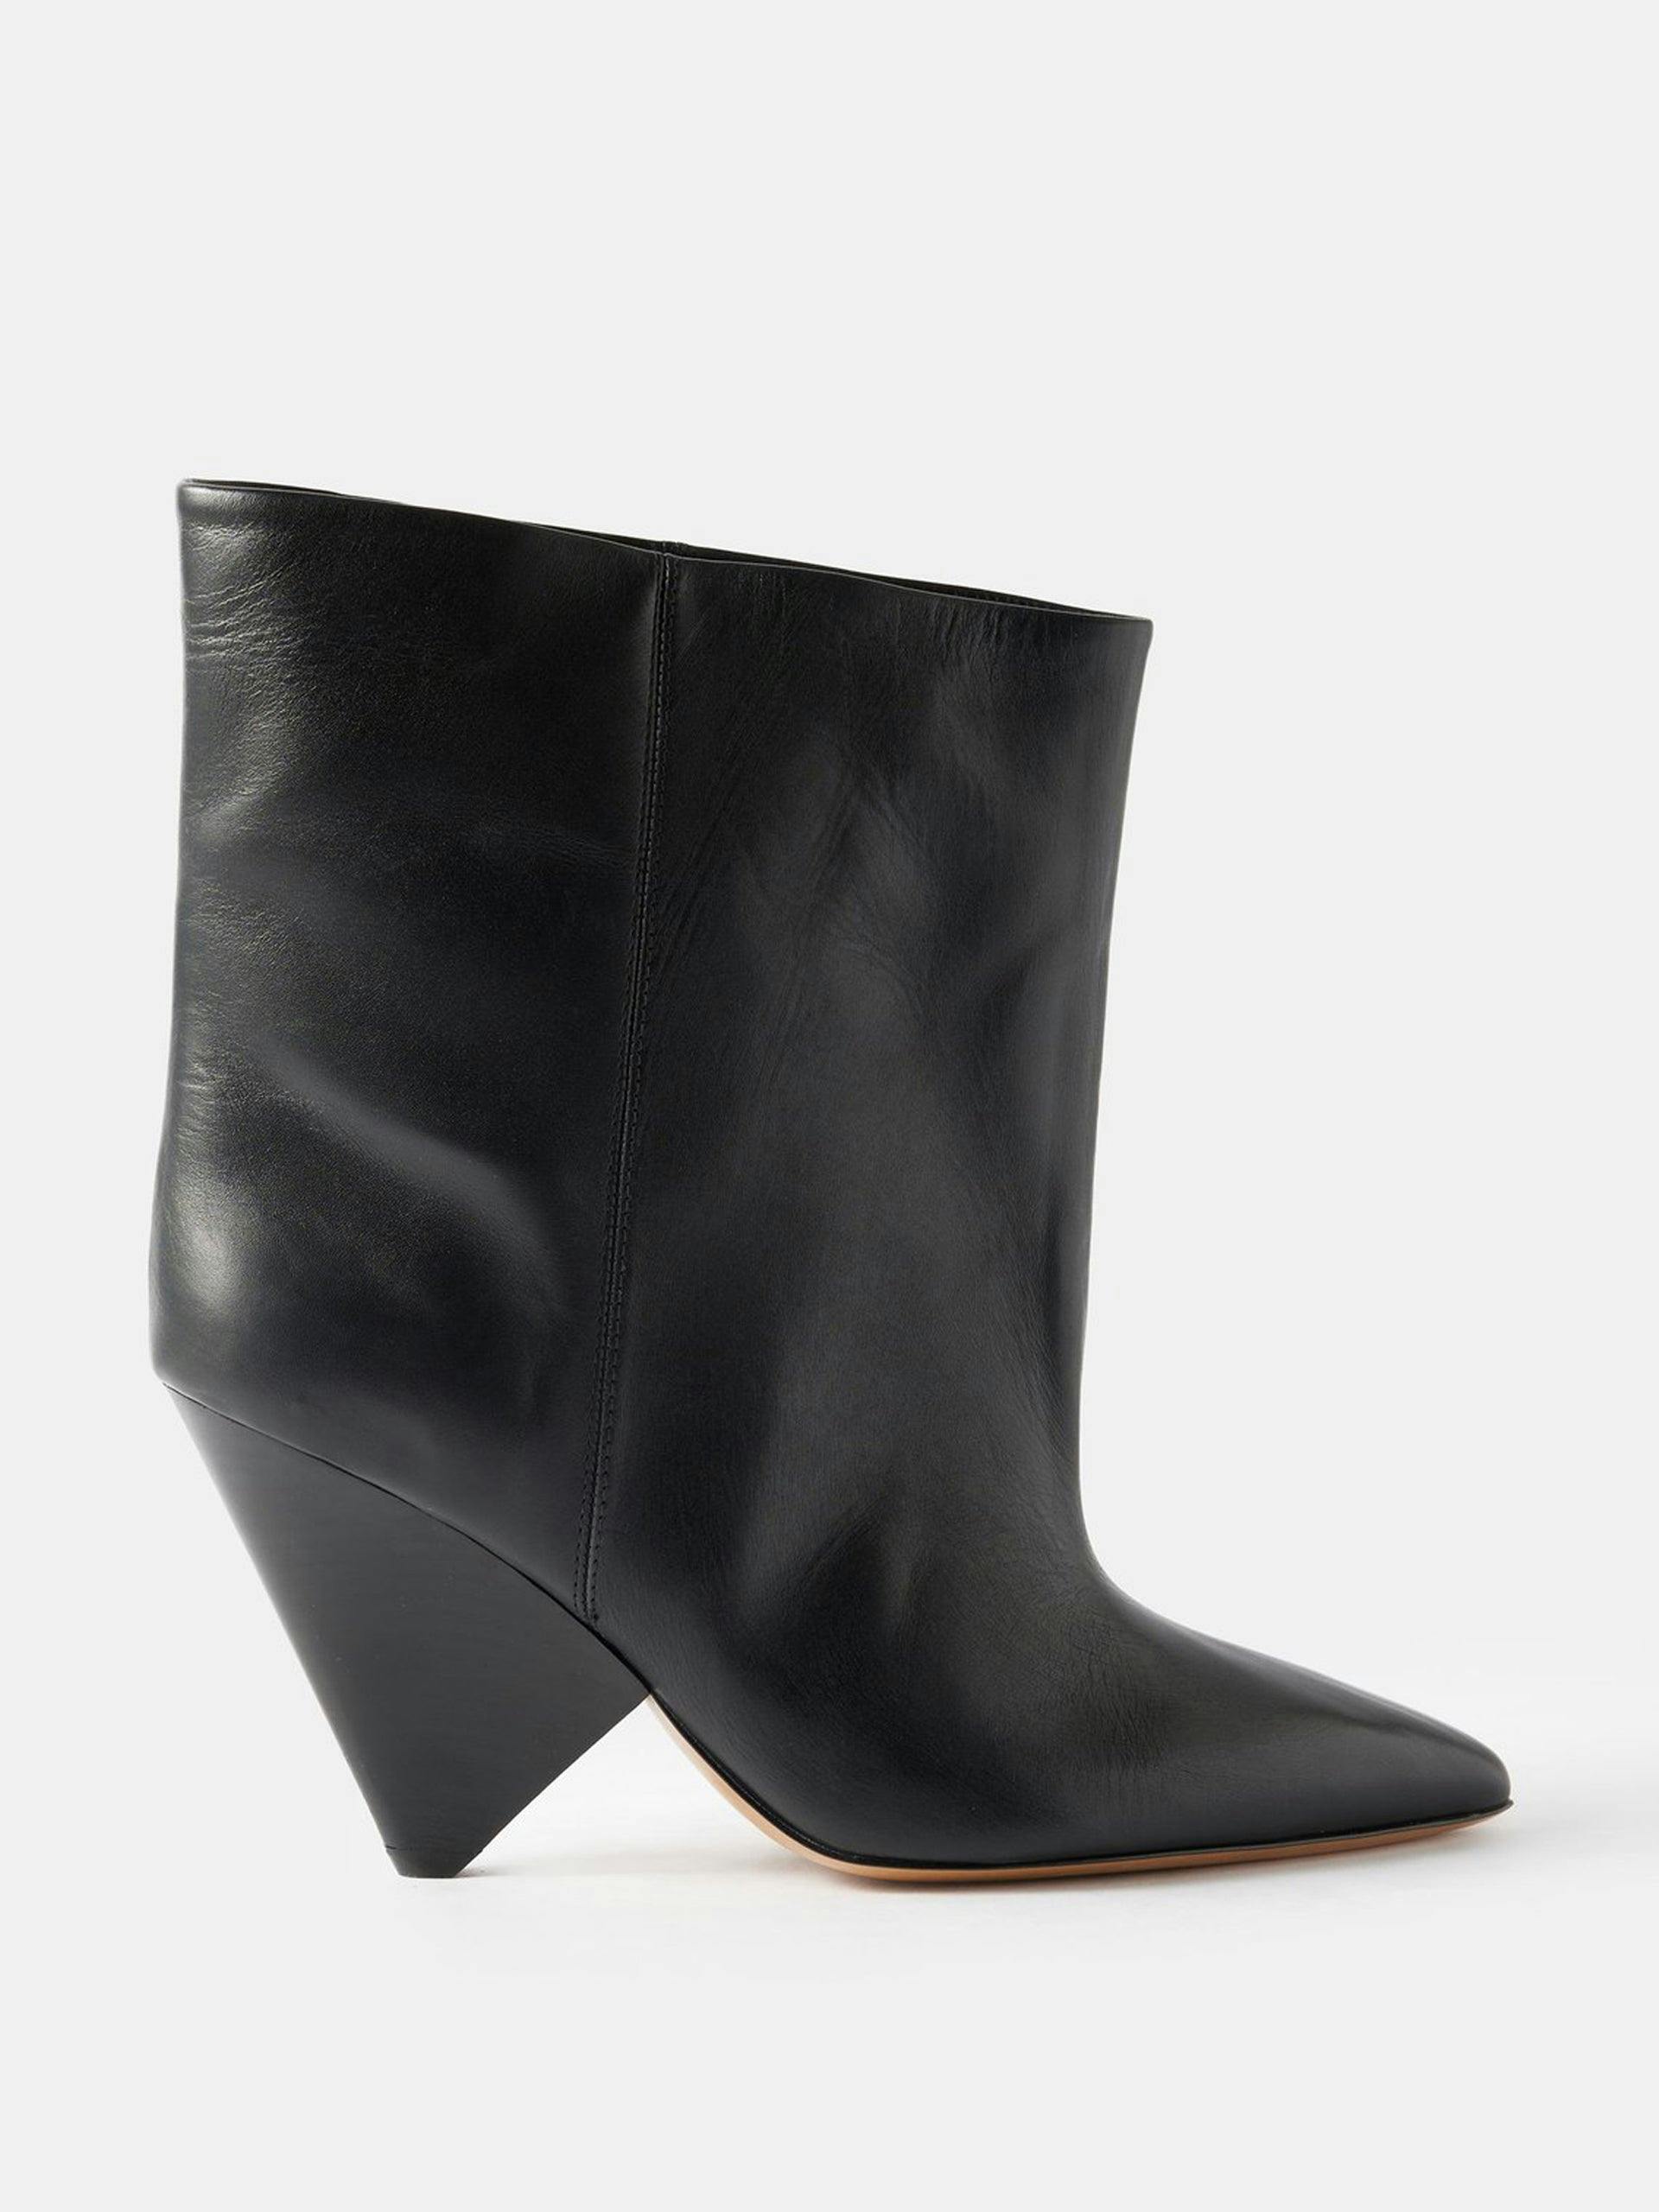 Black pointed-toe leather boots